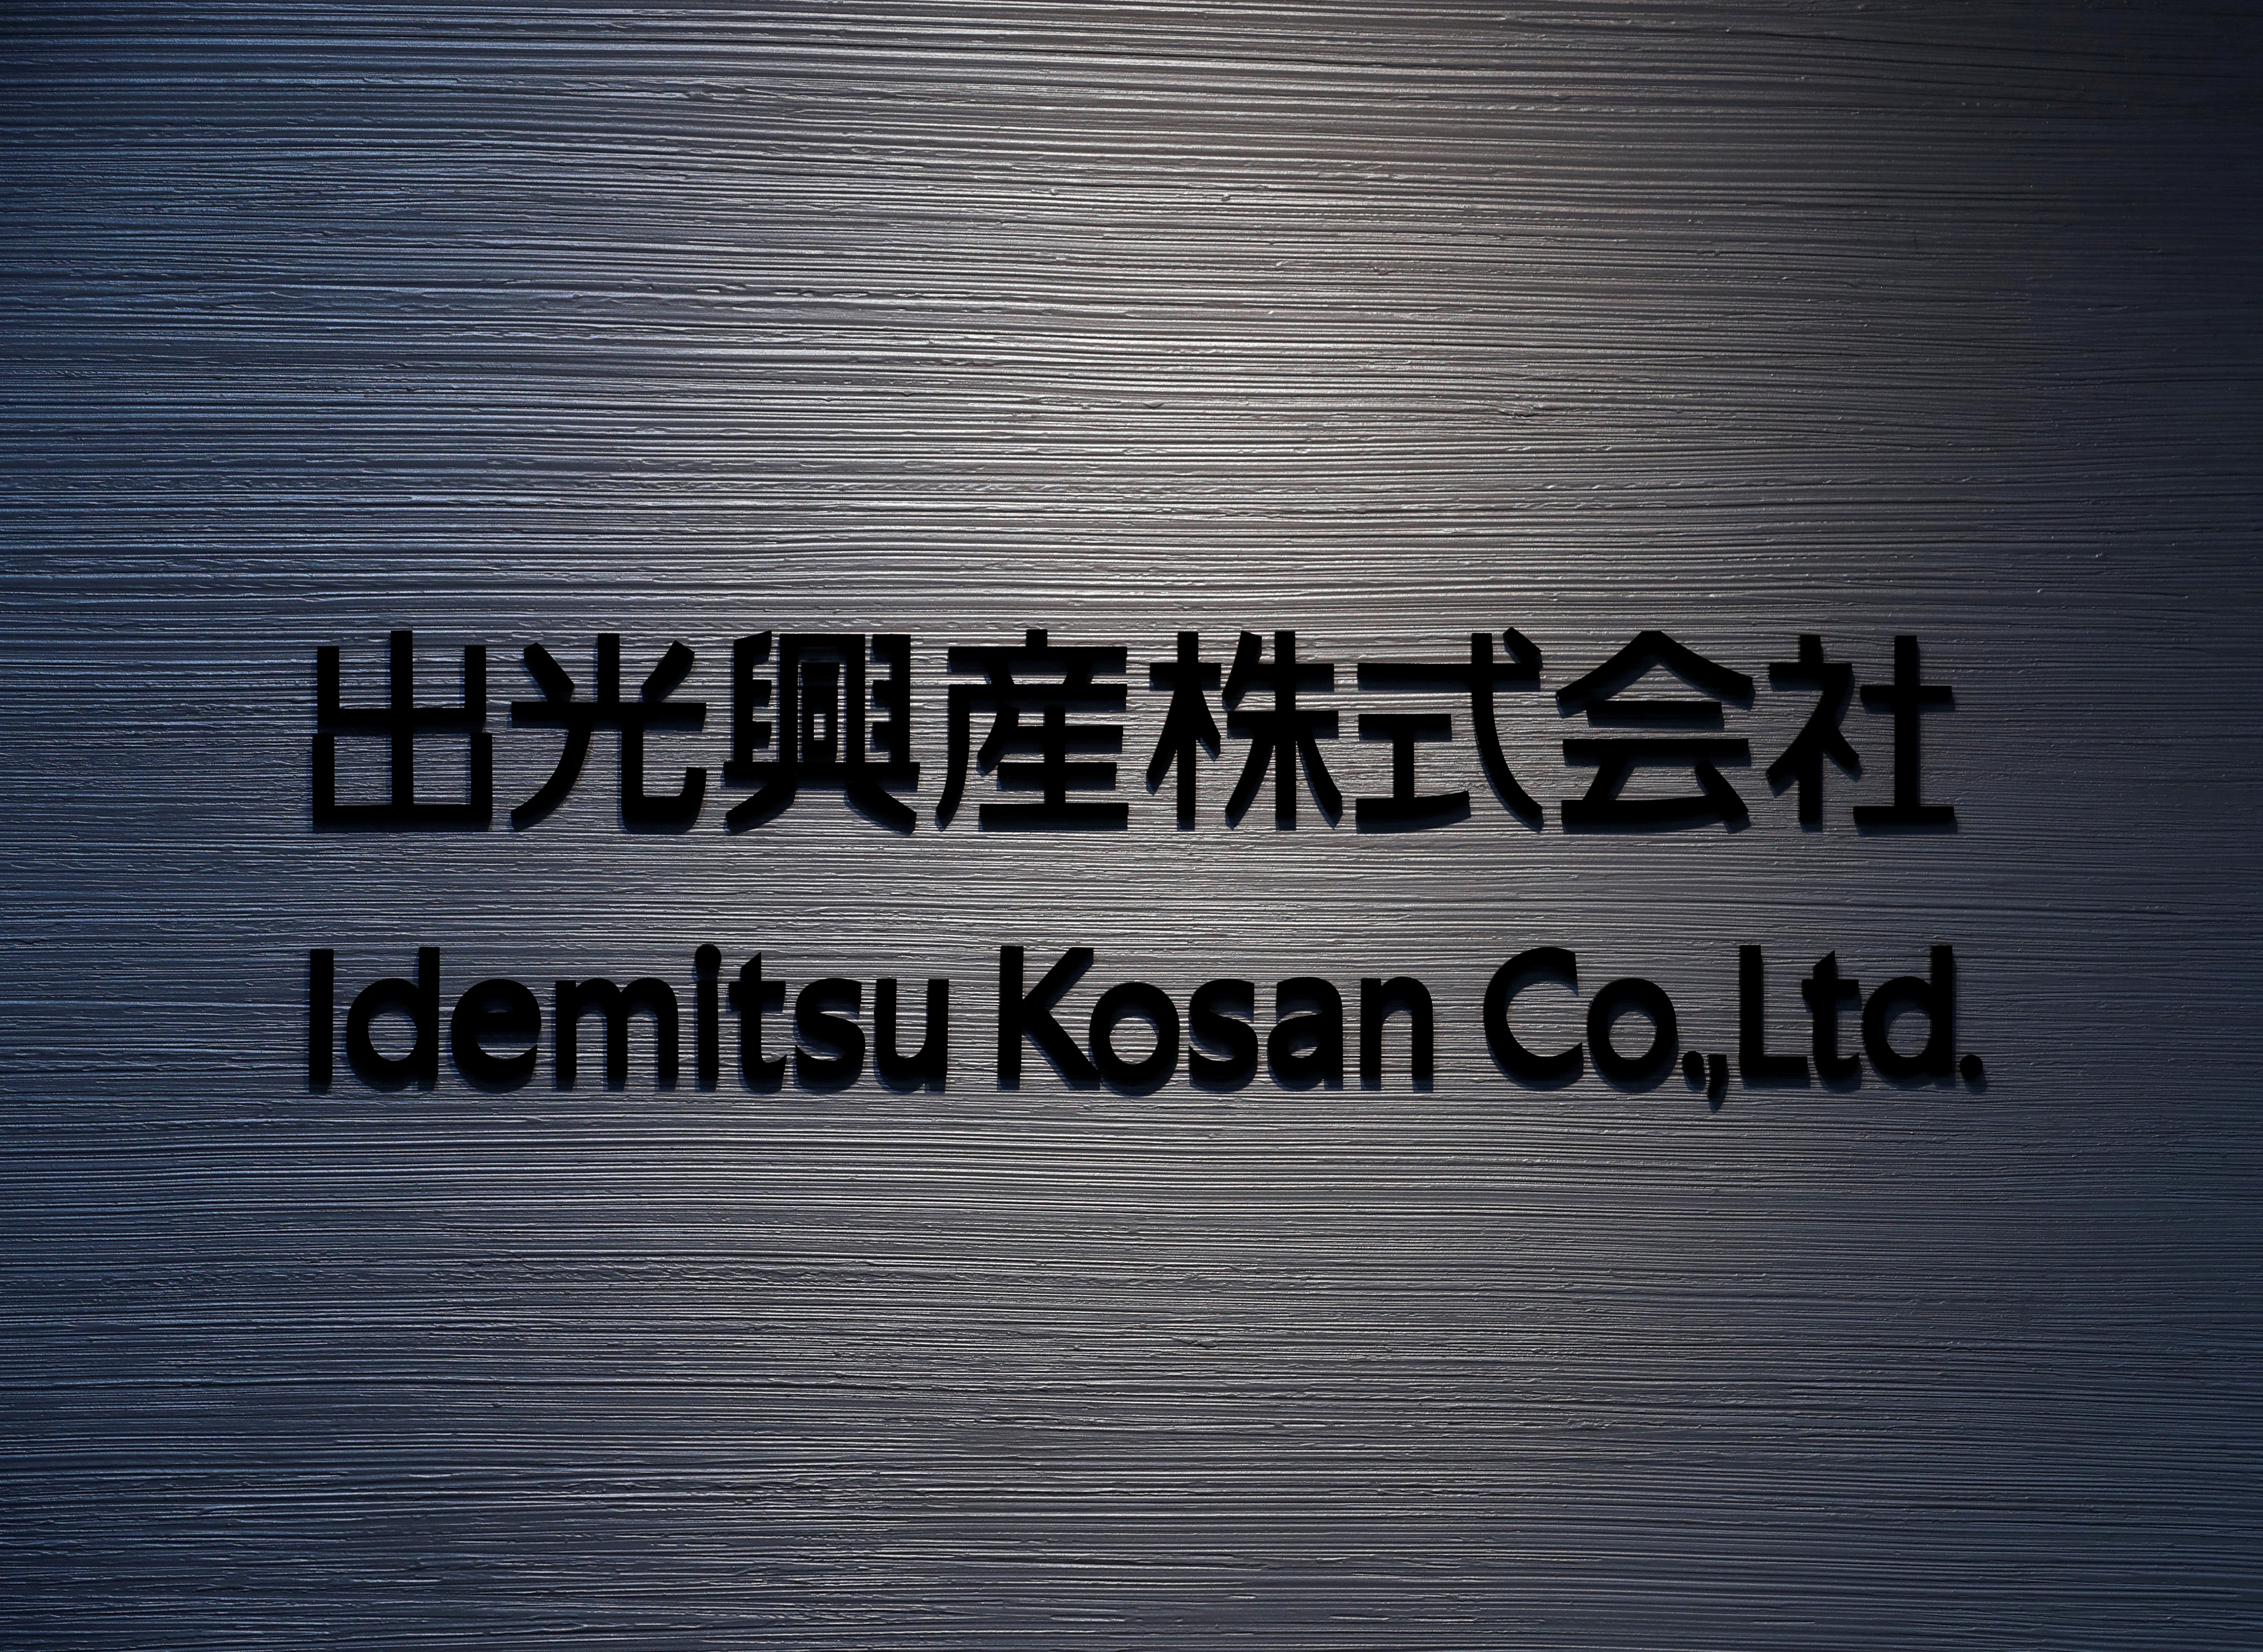 Idemitsu Kosan's logo is pictured at its headquarters in Tokyo